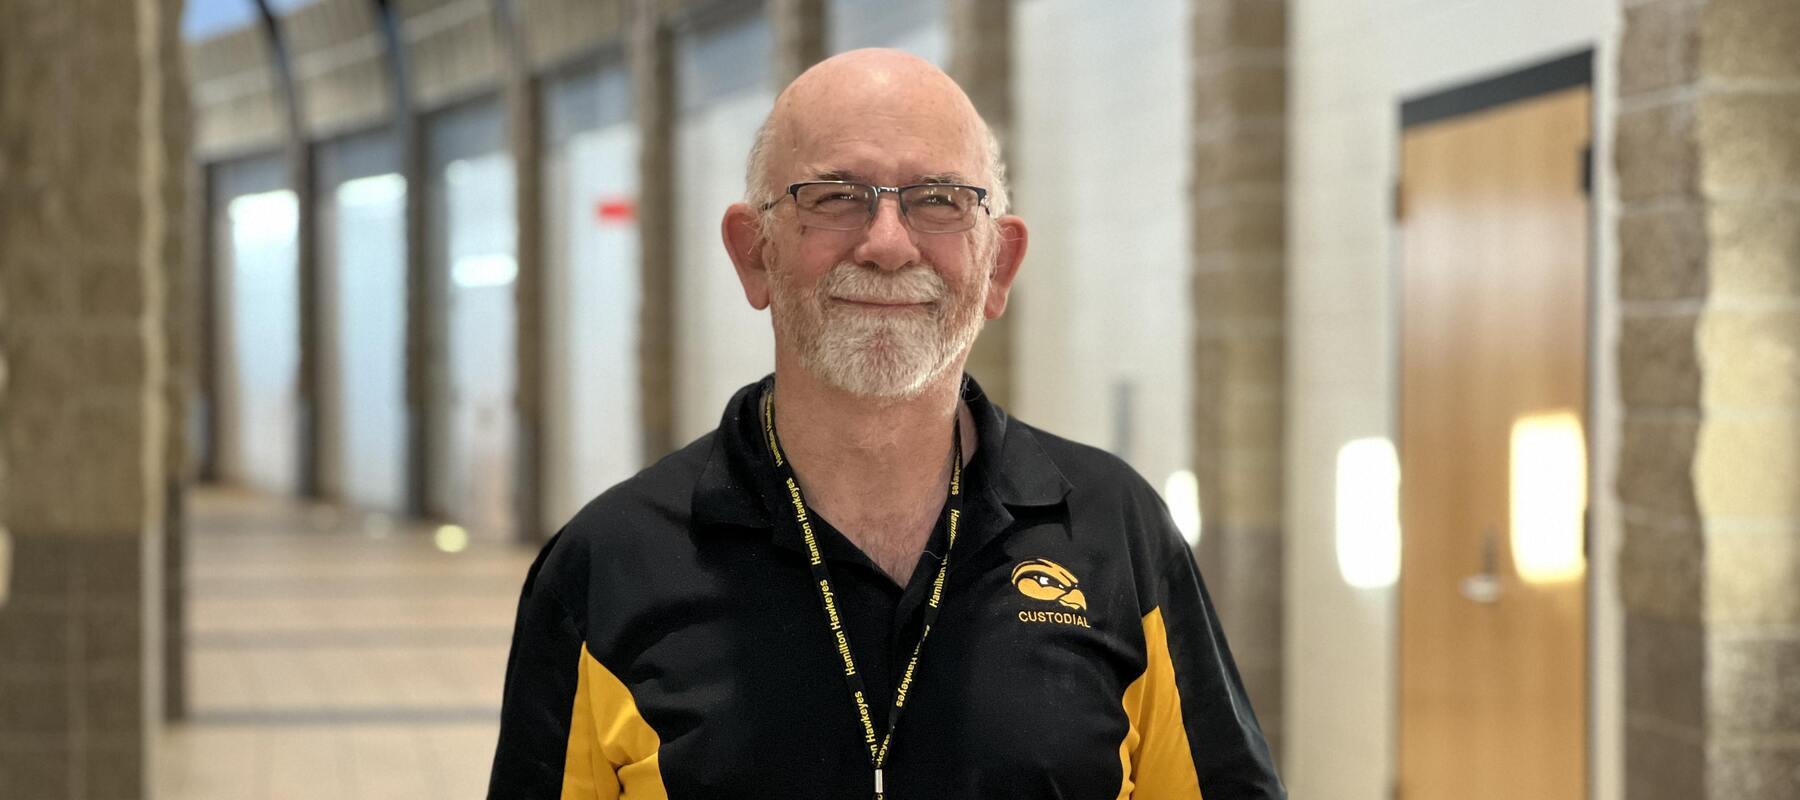 Custodial employee Chuck, who is celebrating his 46th year of work at Hamilton Community Schools in the 2022-23 school year.